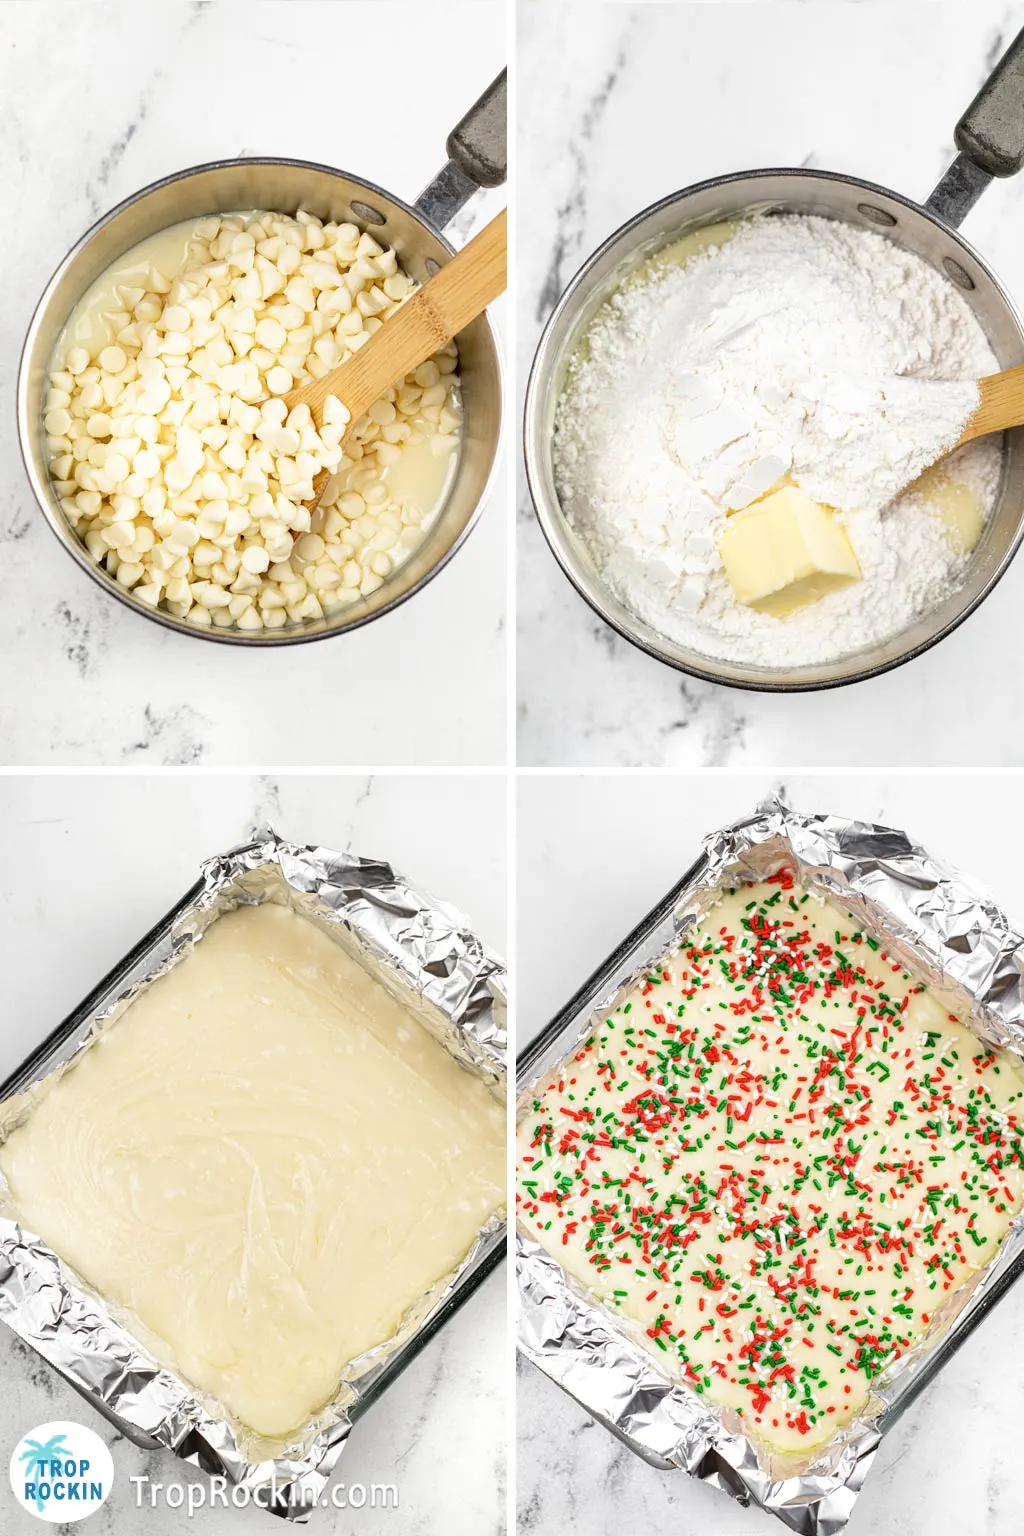 Four photo collage. Top left photo of saucepan with condensed milk and unmelted chocolate chips. Top right saucepan with added butter and sugar cookie mix. Bottom left fudge mixture poured into square baking pan. Bottom right Christmas sprinkles added on top of fudge mixture in square pan.